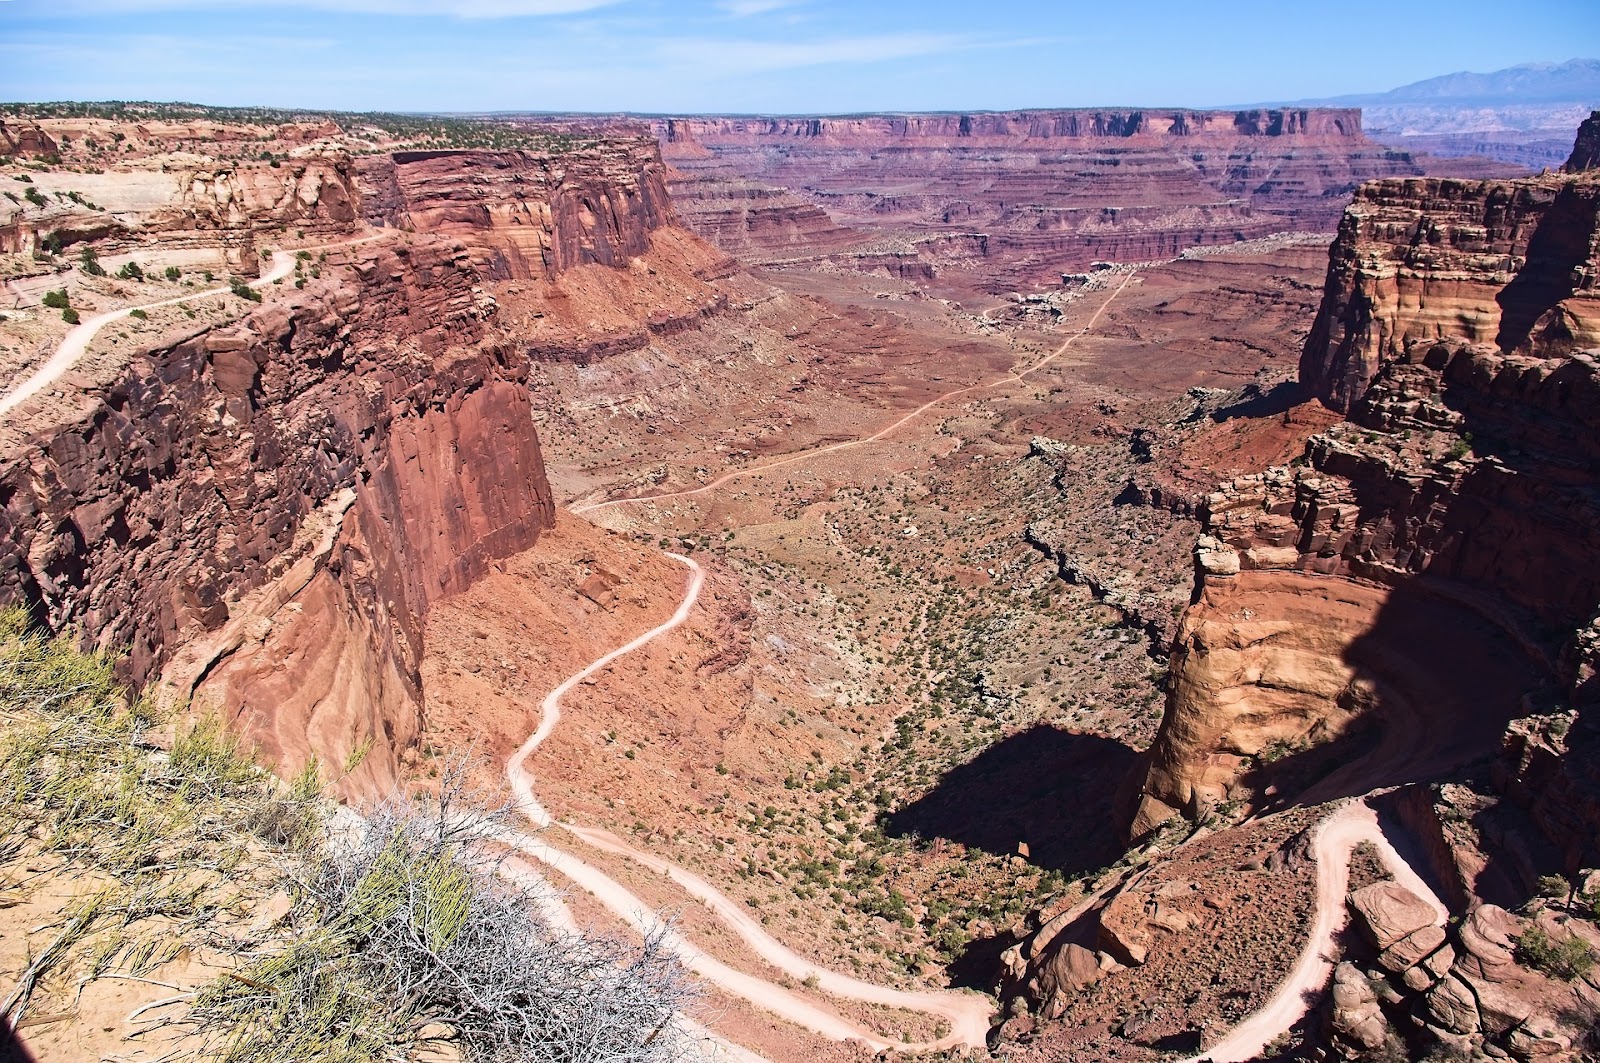 White rim road is an off-roading trail that spans 160 kilometers in Canyonlands National Park, Utah. It is one of the most scenic drives in the world.